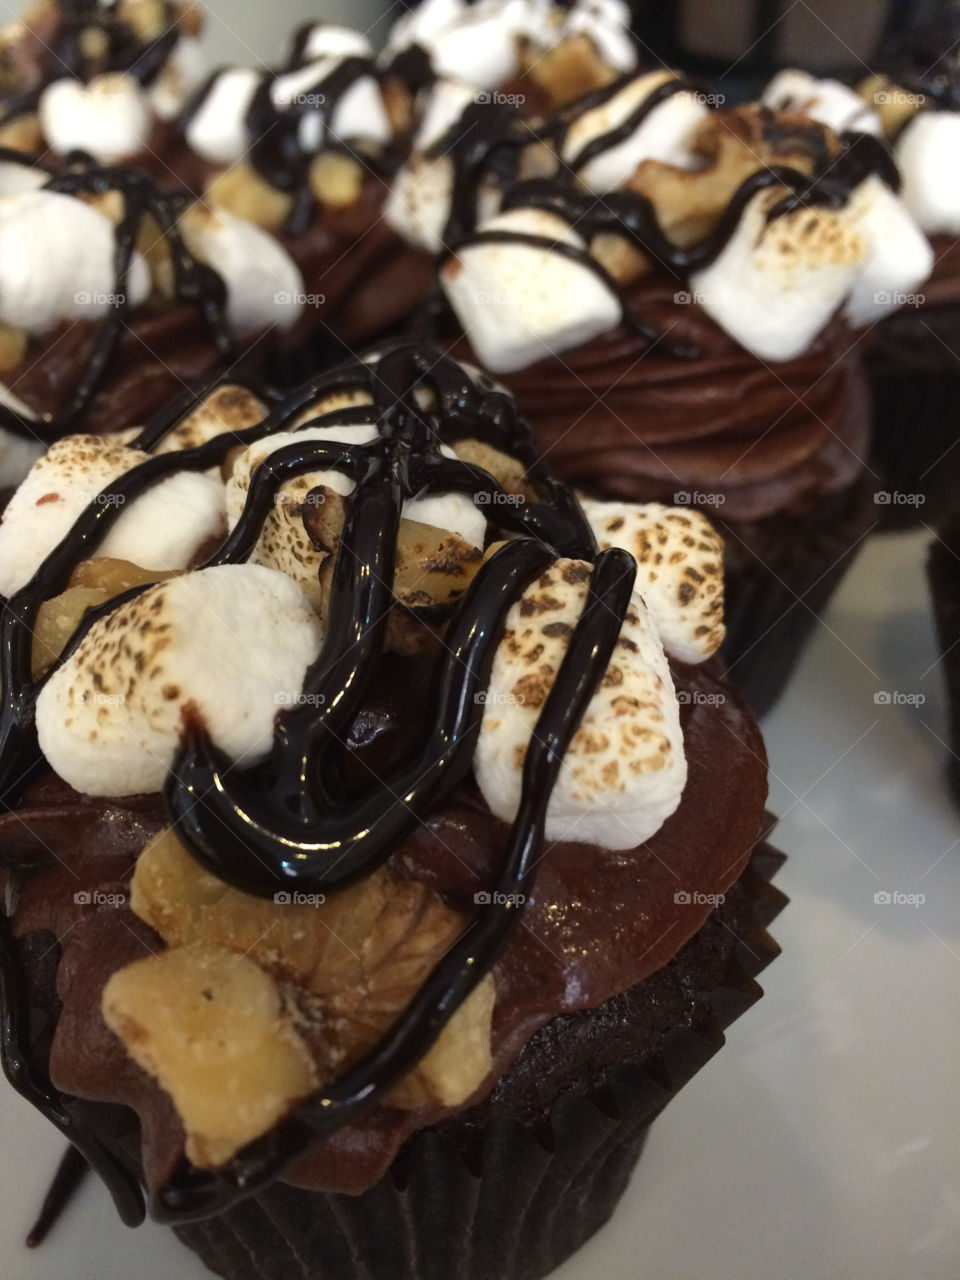 Rocky Road Cupcakes 